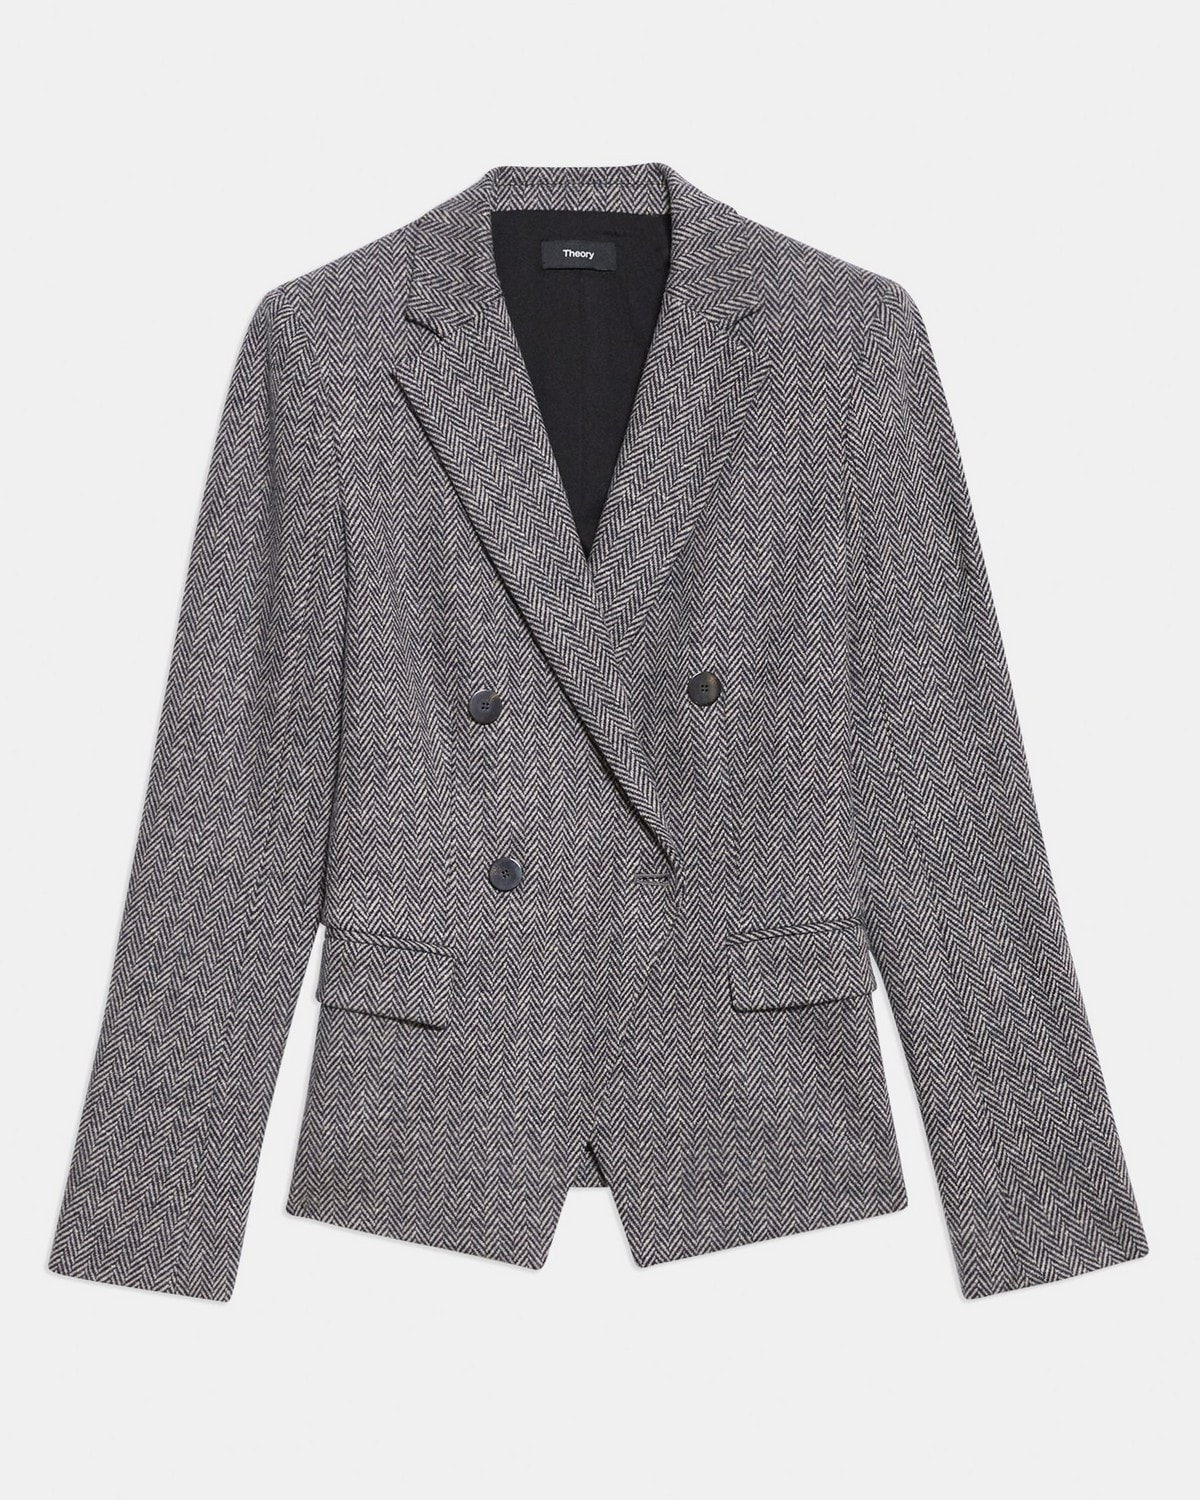 Angled Blazer in Wool Blend Knit